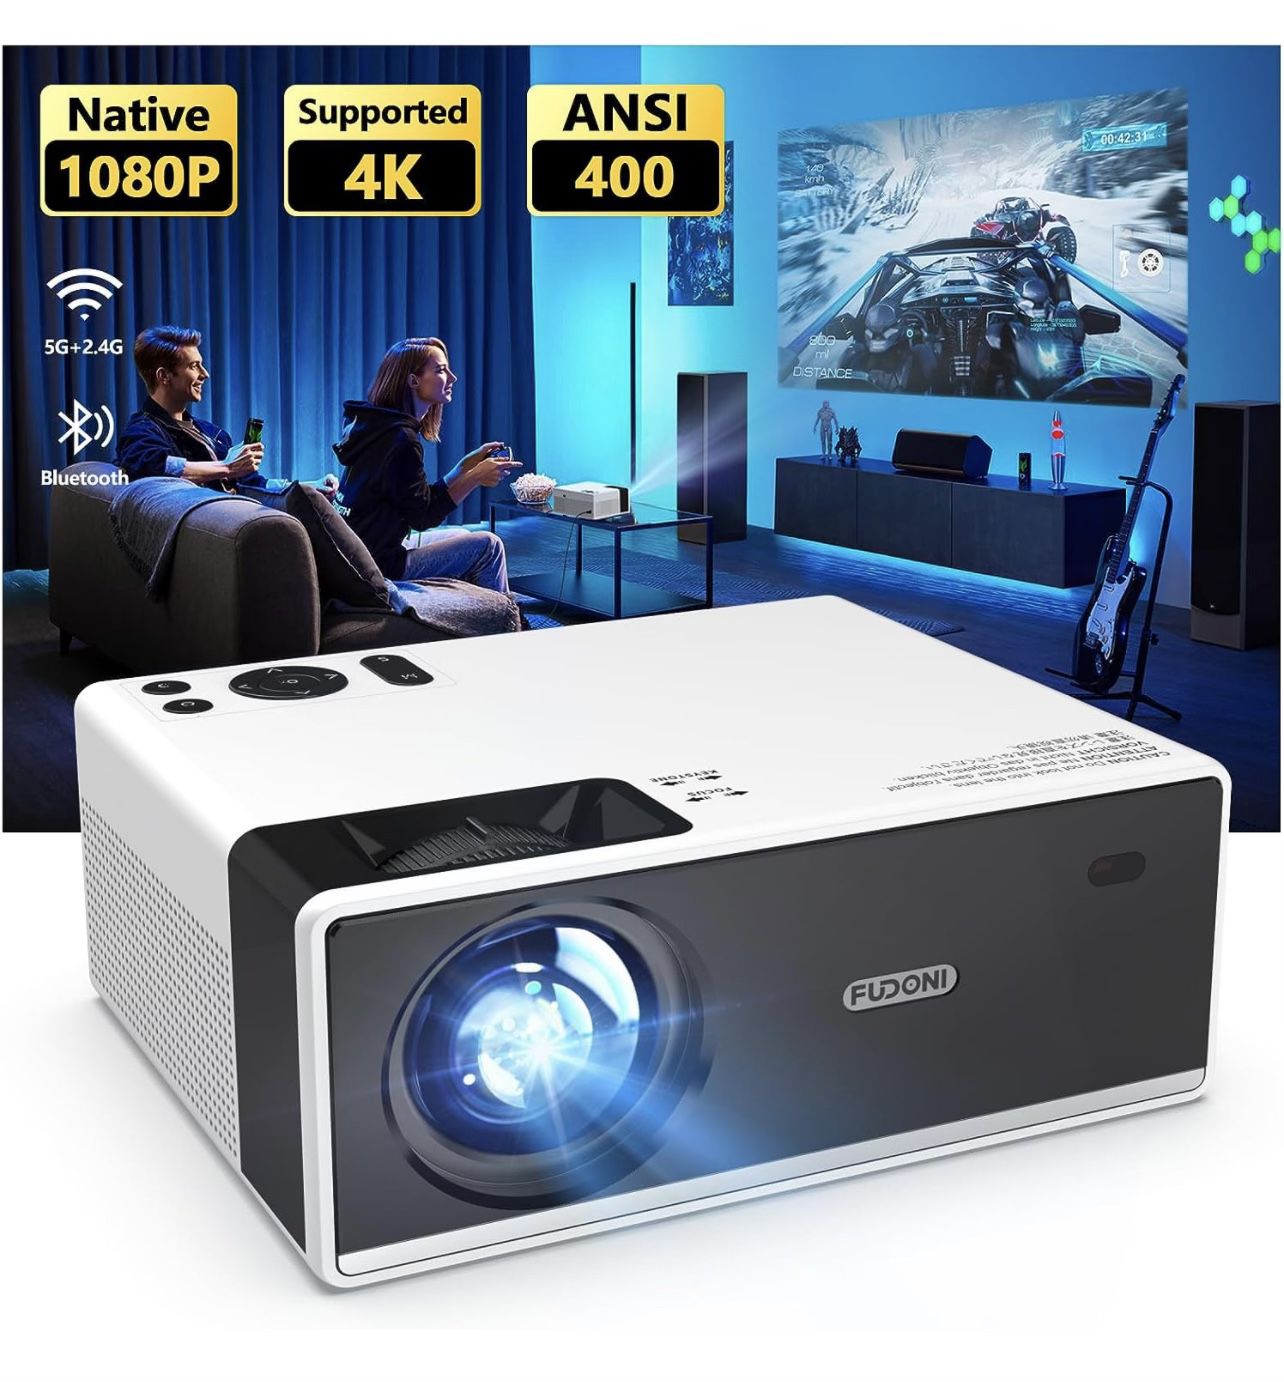 BRAND NEW IN BOX Fudoni 4K Support Projector with WiFi and Bluetooth, Outdoor Portable Mini Projector